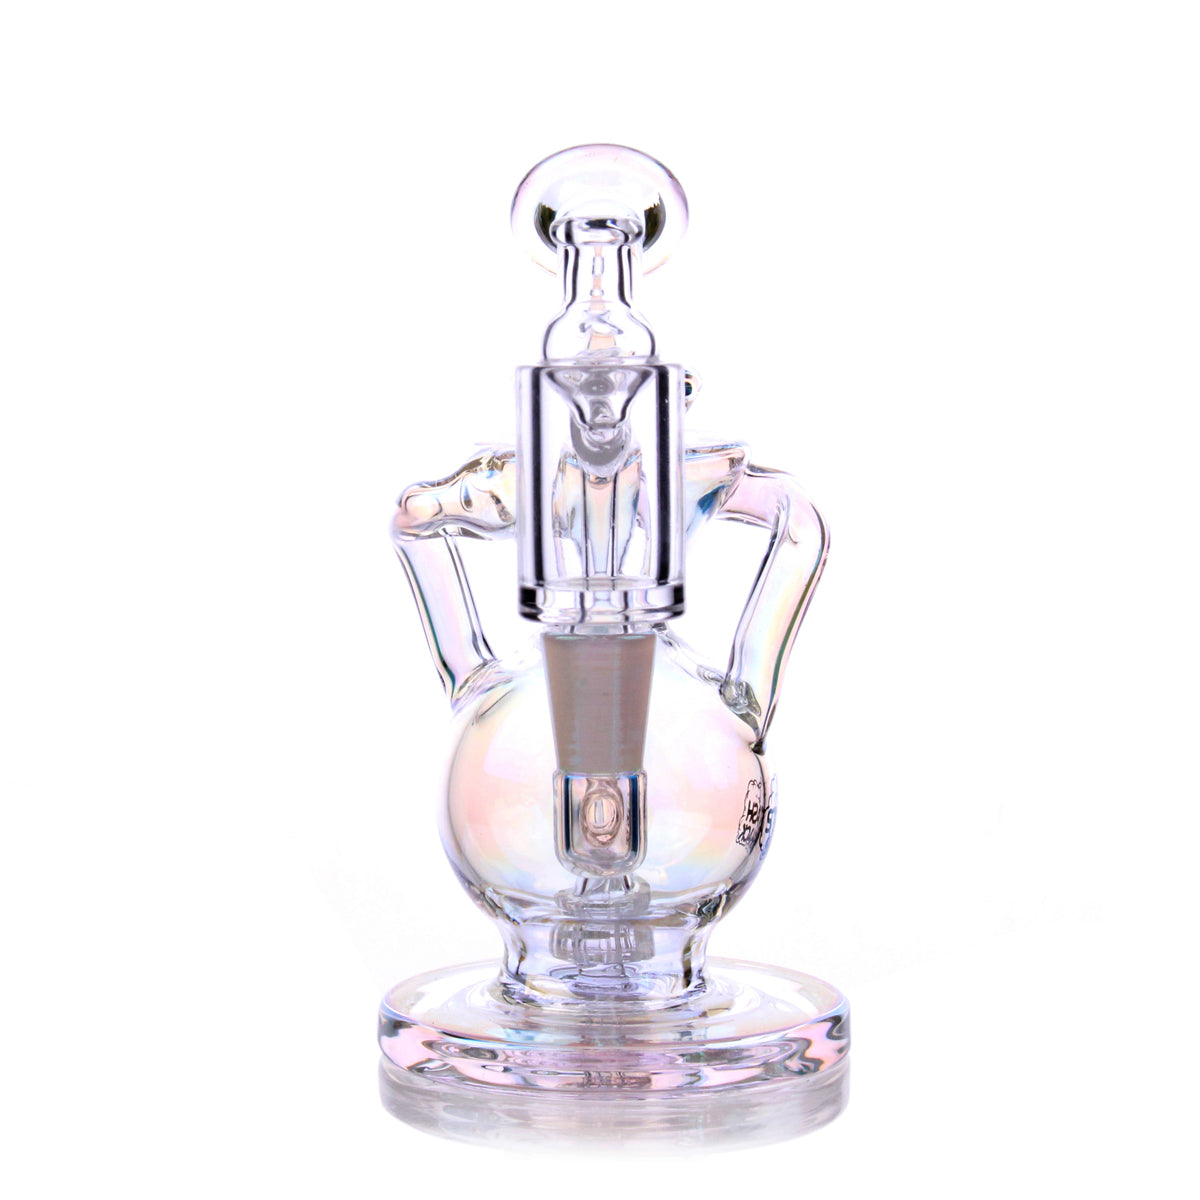 Lirio Mini Rig in clear borosilicate glass with a recycler design and showerhead percolator, front view on white background